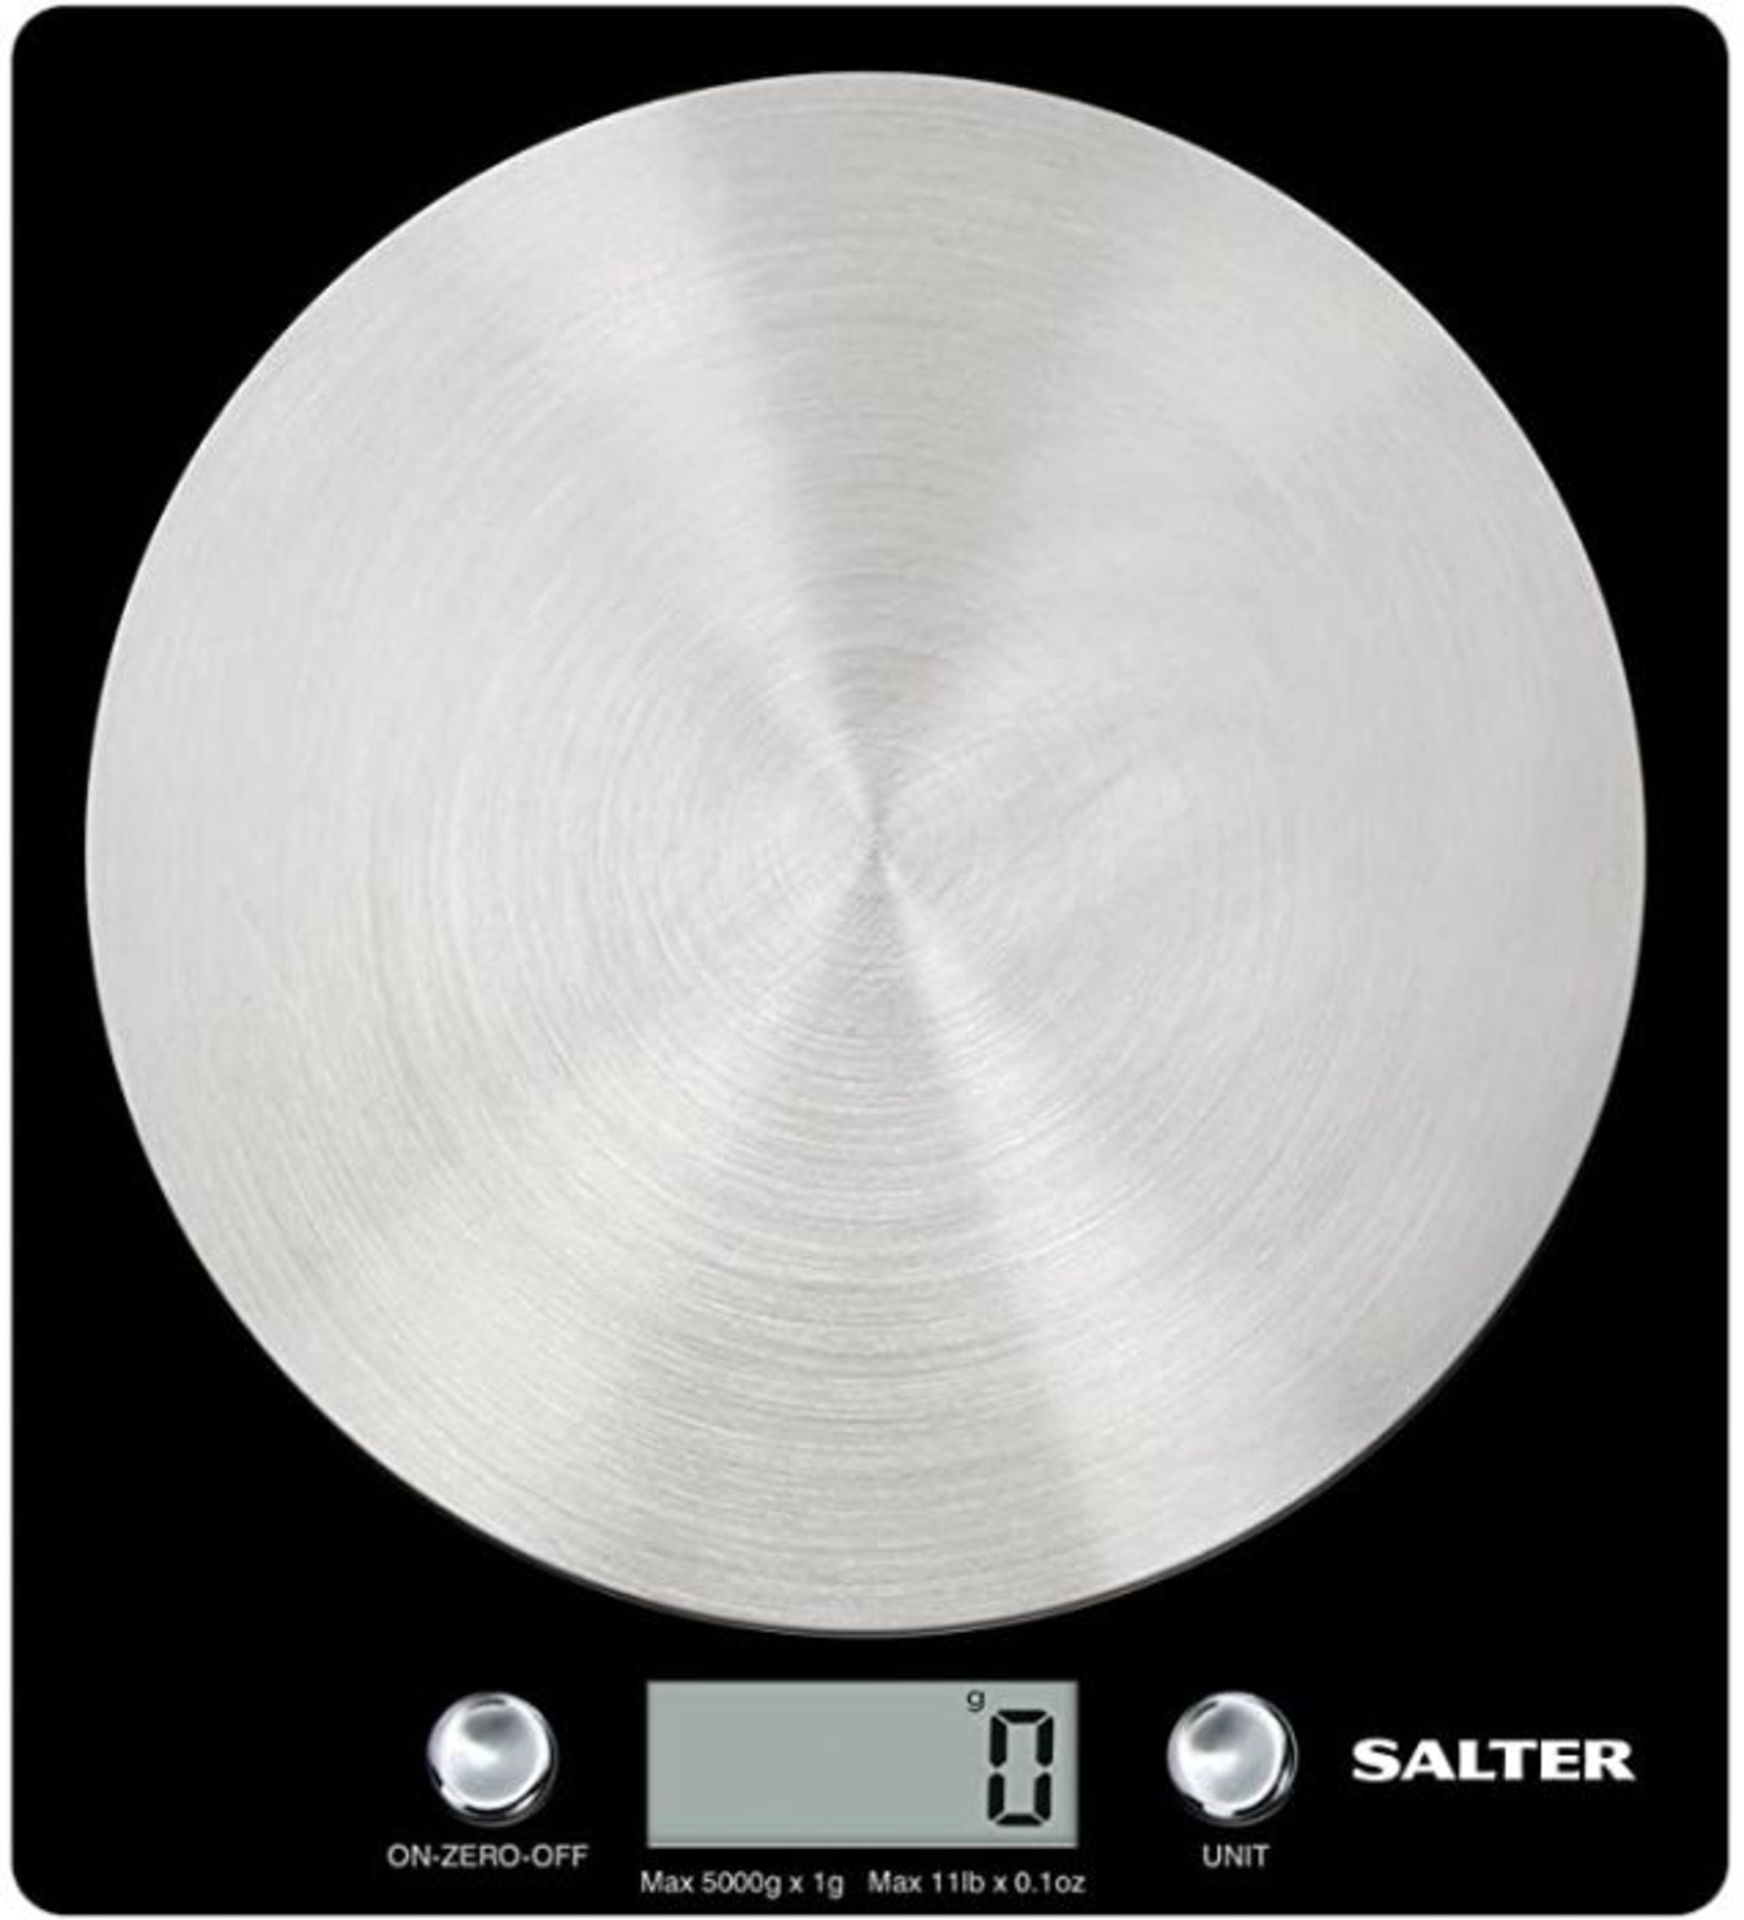 Salter Digital Seen on TV, Stylish Slim Design Electronic Cooking Scale for Home + Kitchen, Weigh - Image 2 of 2